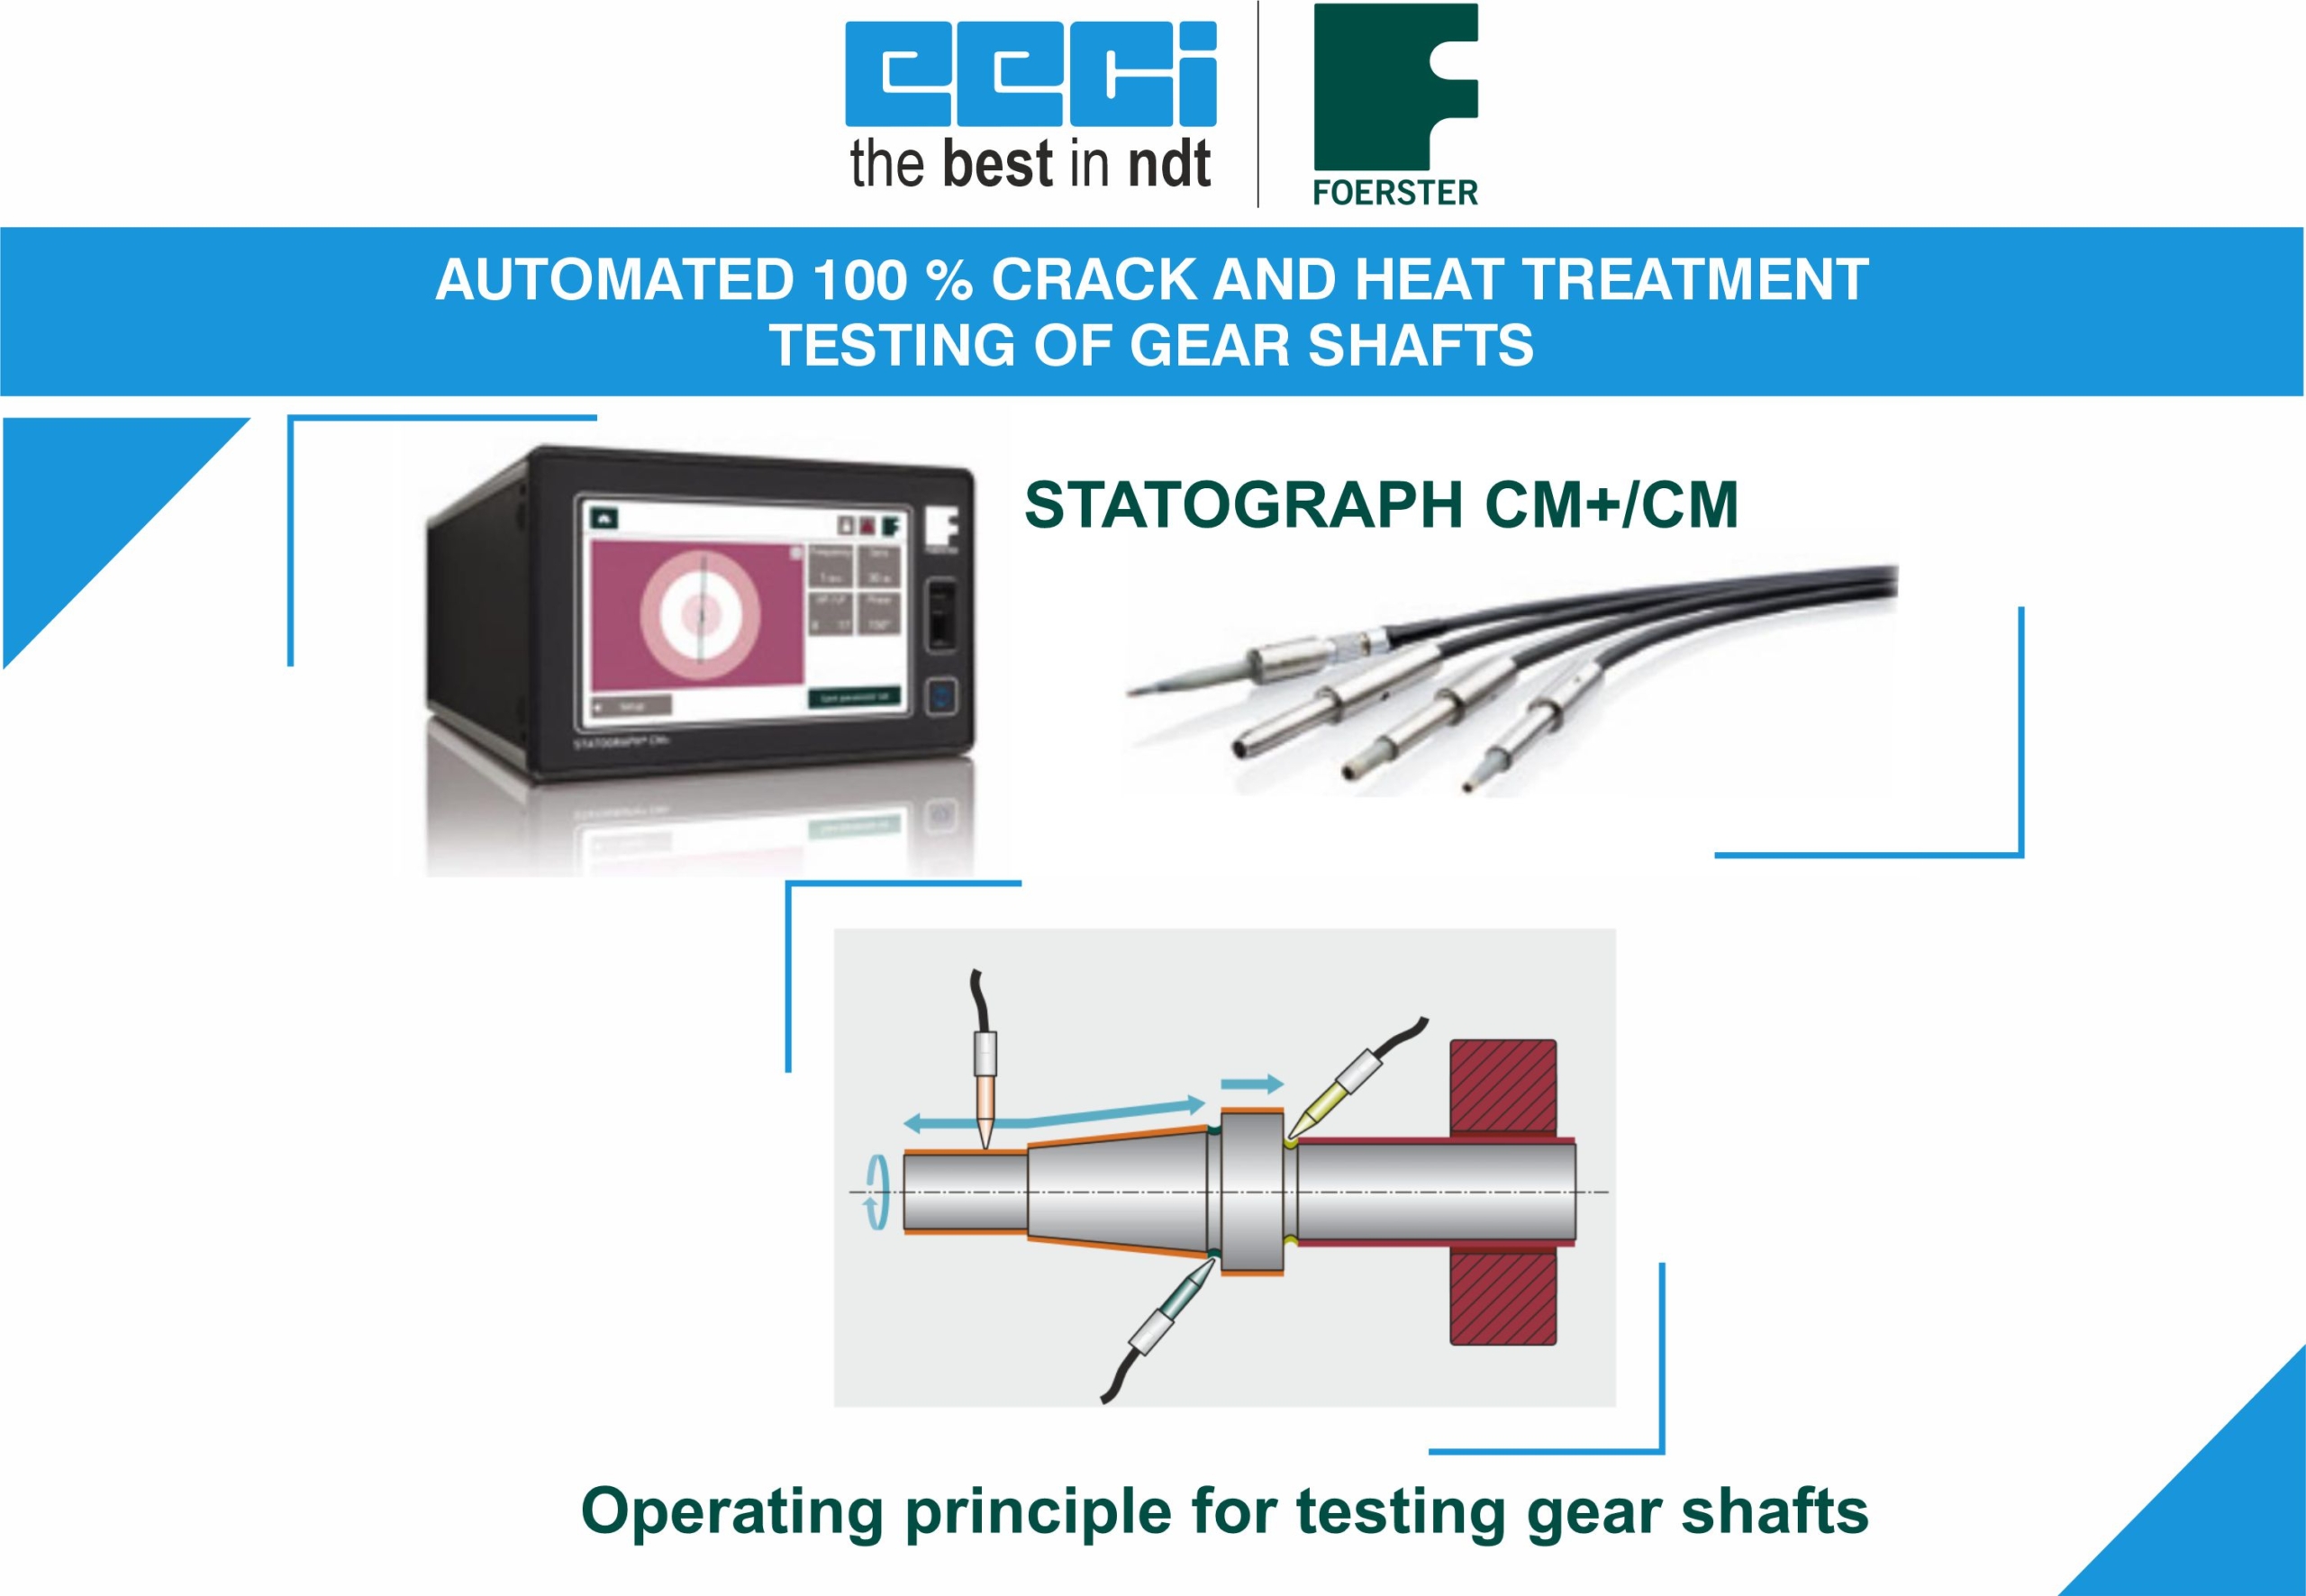 Automated 100% Crack & Heat Treatment Testing of Gear Shafts